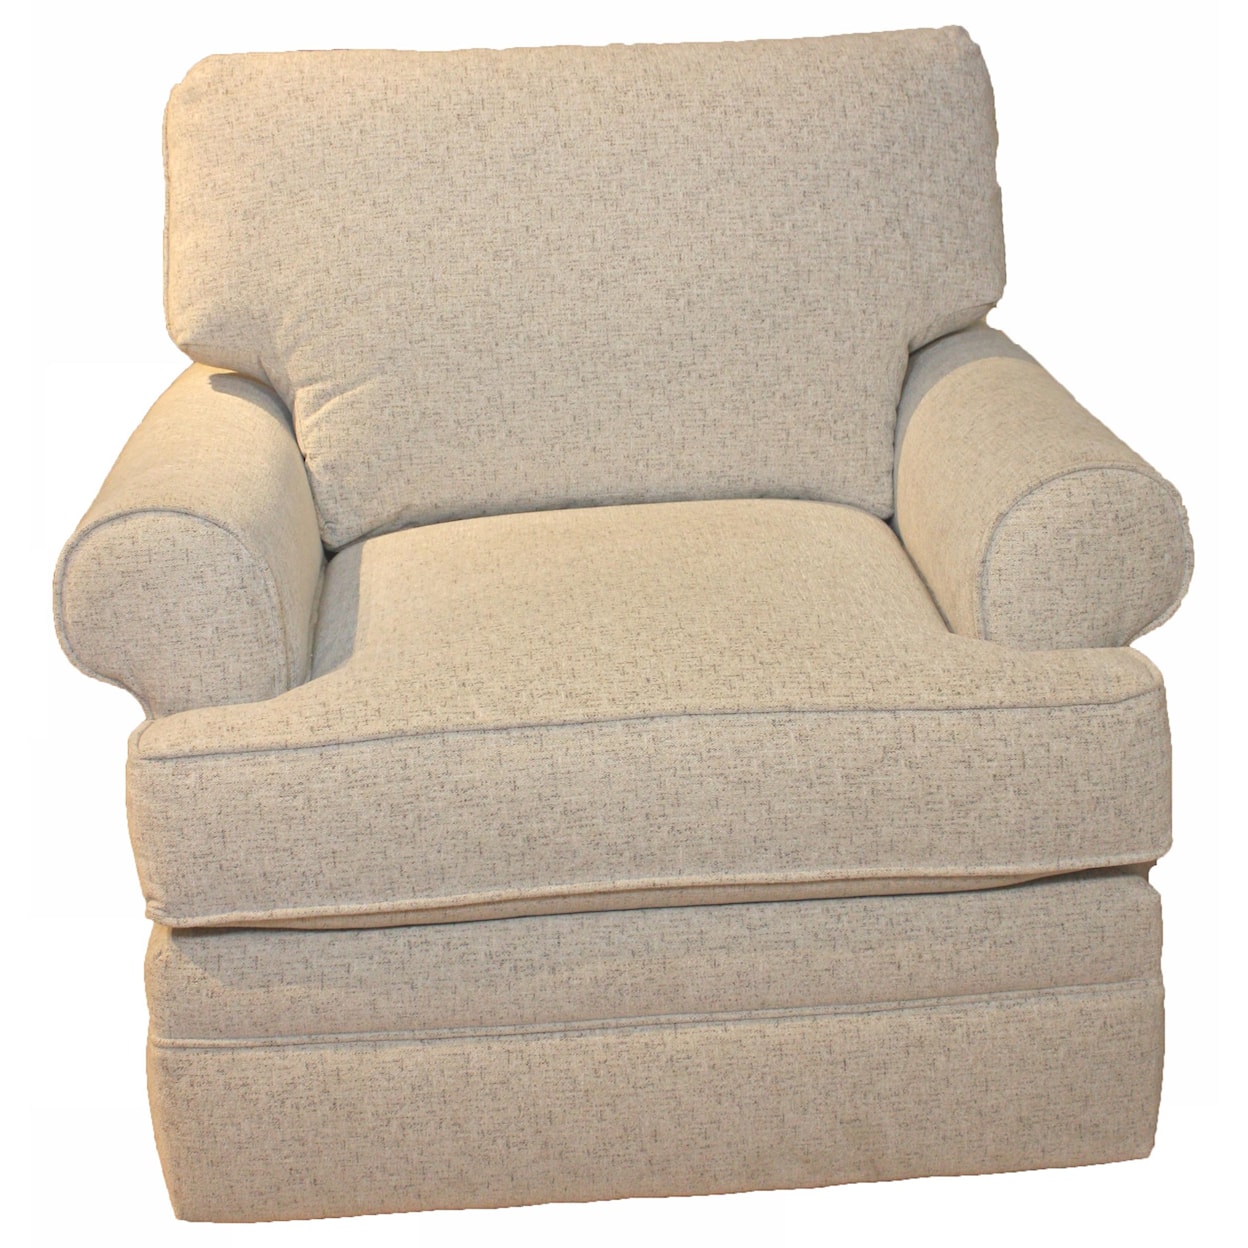 Braxton Culler BC Options Upholstered Chairs